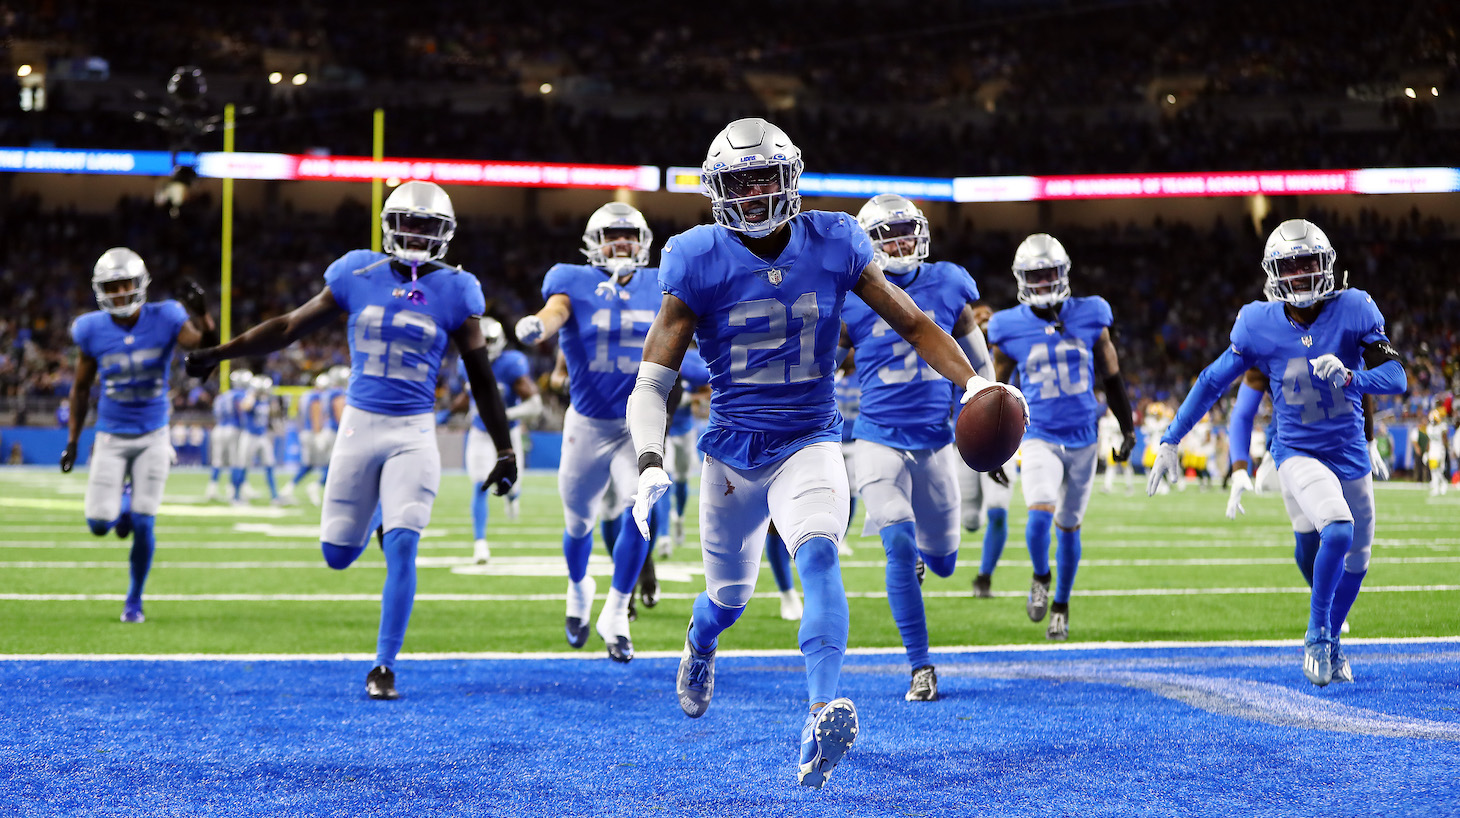 DETROIT, MICHIGAN - JANUARY 09: Tracy Walker III #21 of the Detroit Lions celebrates after an interception against the Green Bay Packers during the fourth quarter at Ford Field on January 09, 2022 in Detroit, Michigan. (Photo by Mike Mulholland/Getty Images)